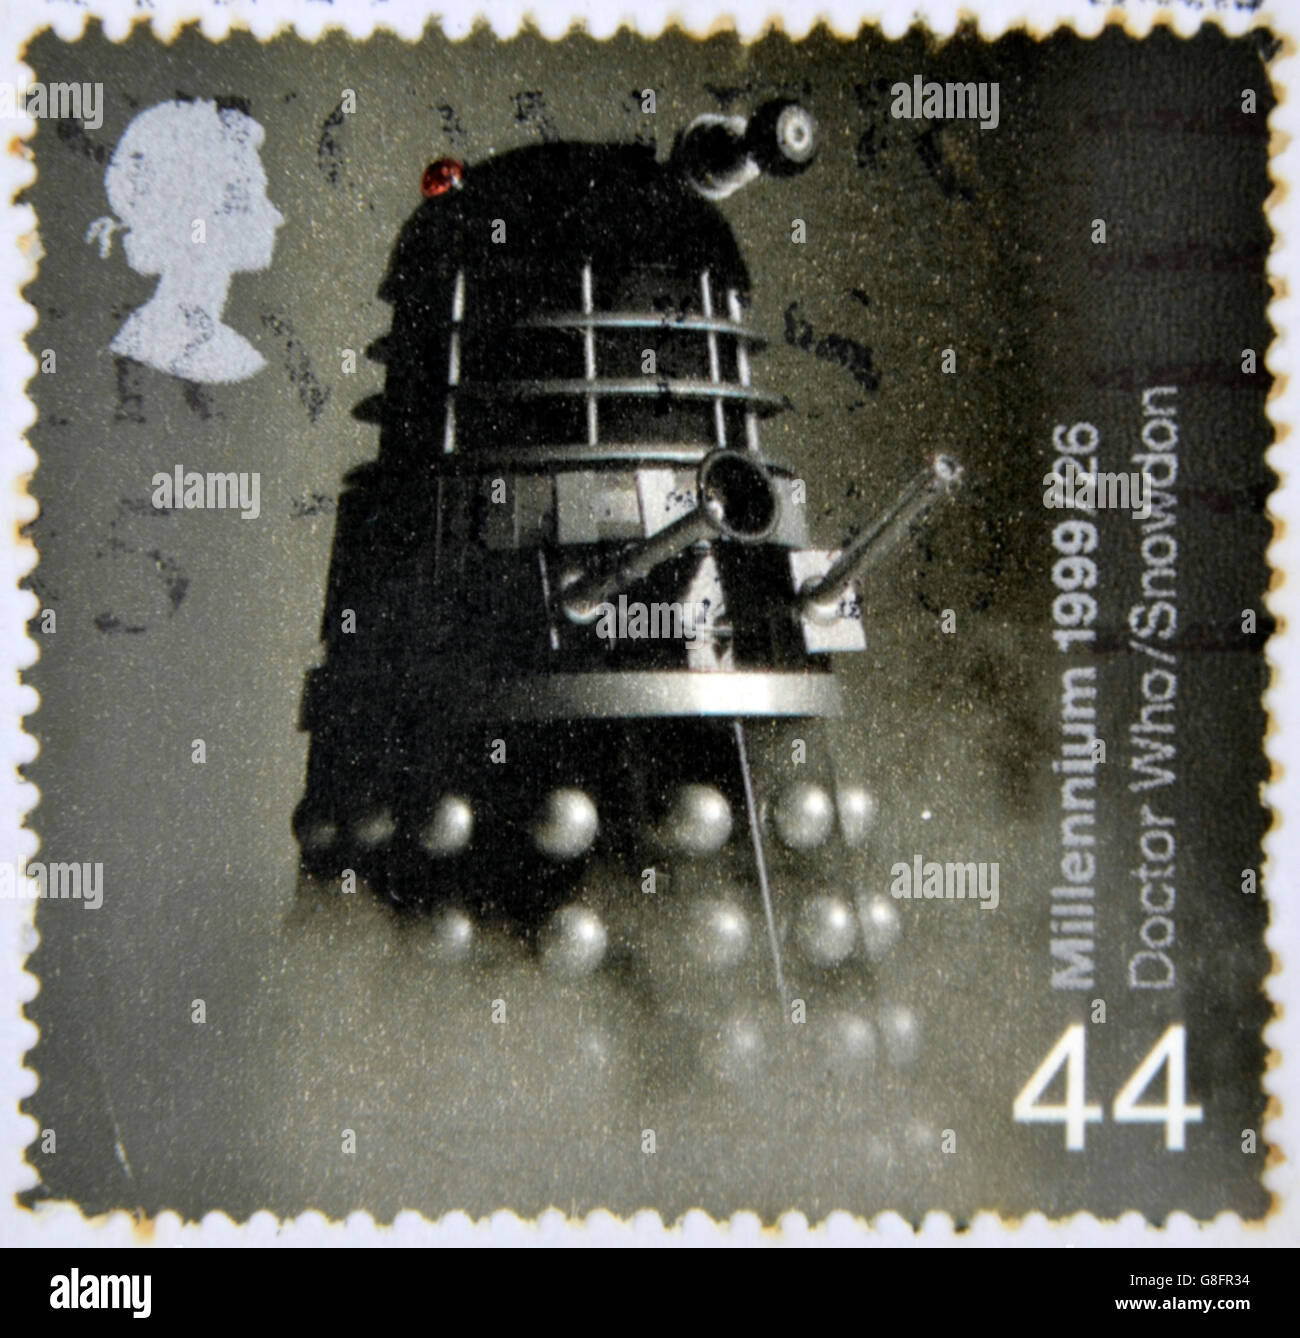 UNITED KINGDOM - CIRCA 1999: A stamp printed in Great Britain shows Doctor Who, Dalek, circa 1999 Stock Photo